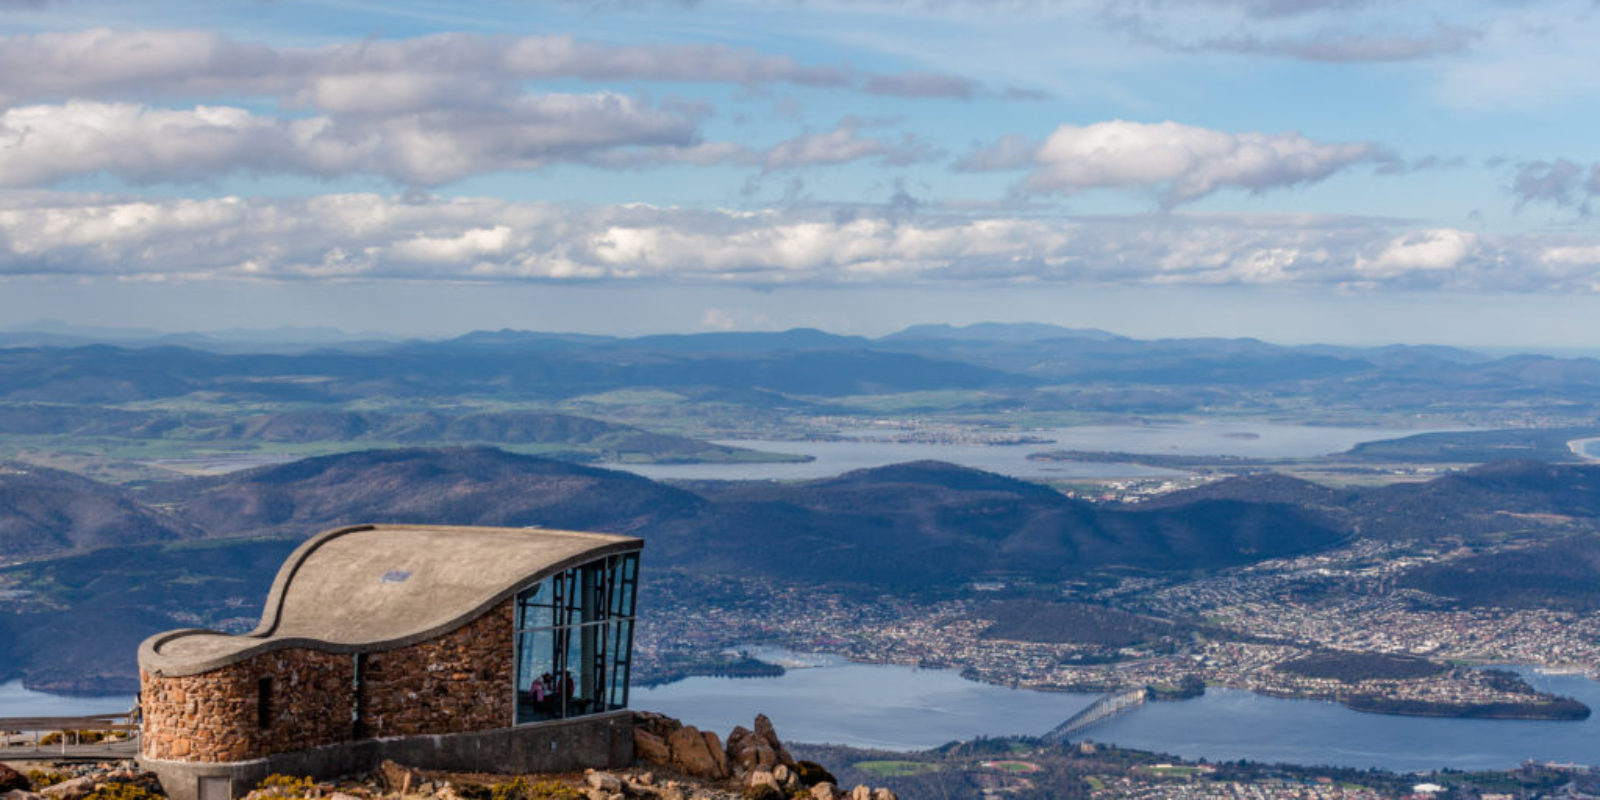 Hobart, Tasmania is a great, off-the-beaten track destination for nature lovers, hikers, and foodies. Go for the hot new wine region and epic sunsets.